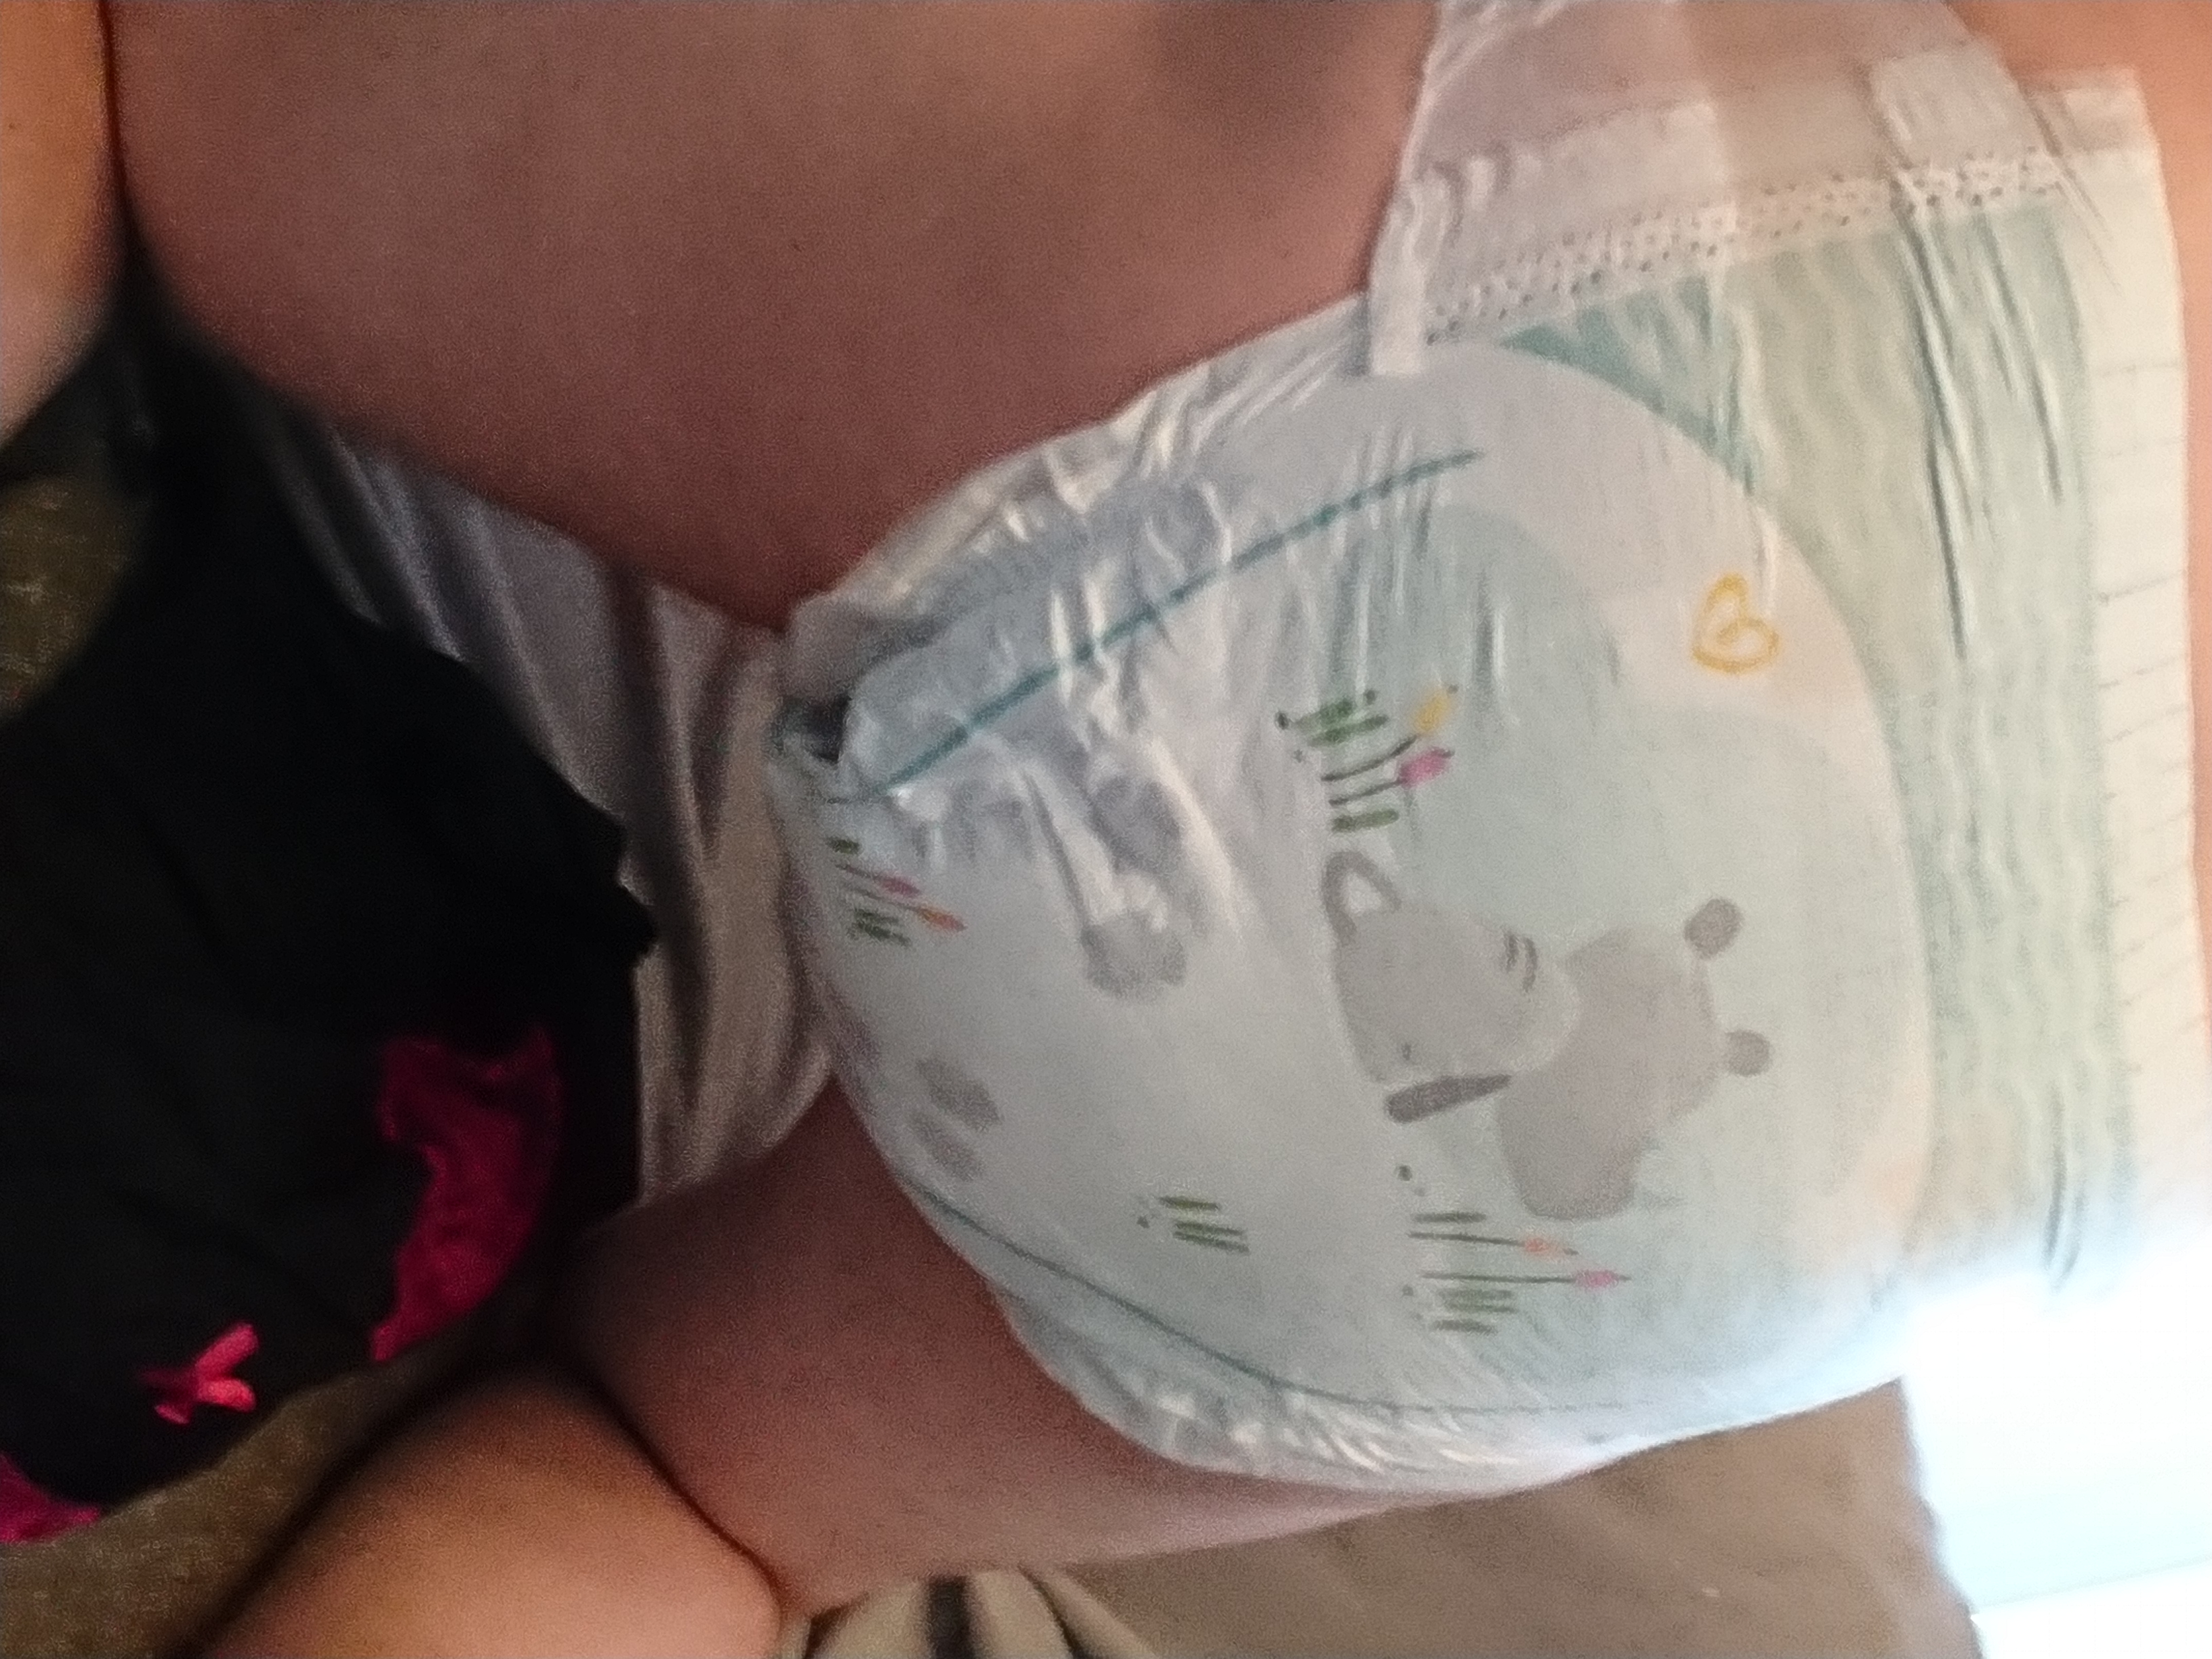 Full poopy pampers diaper